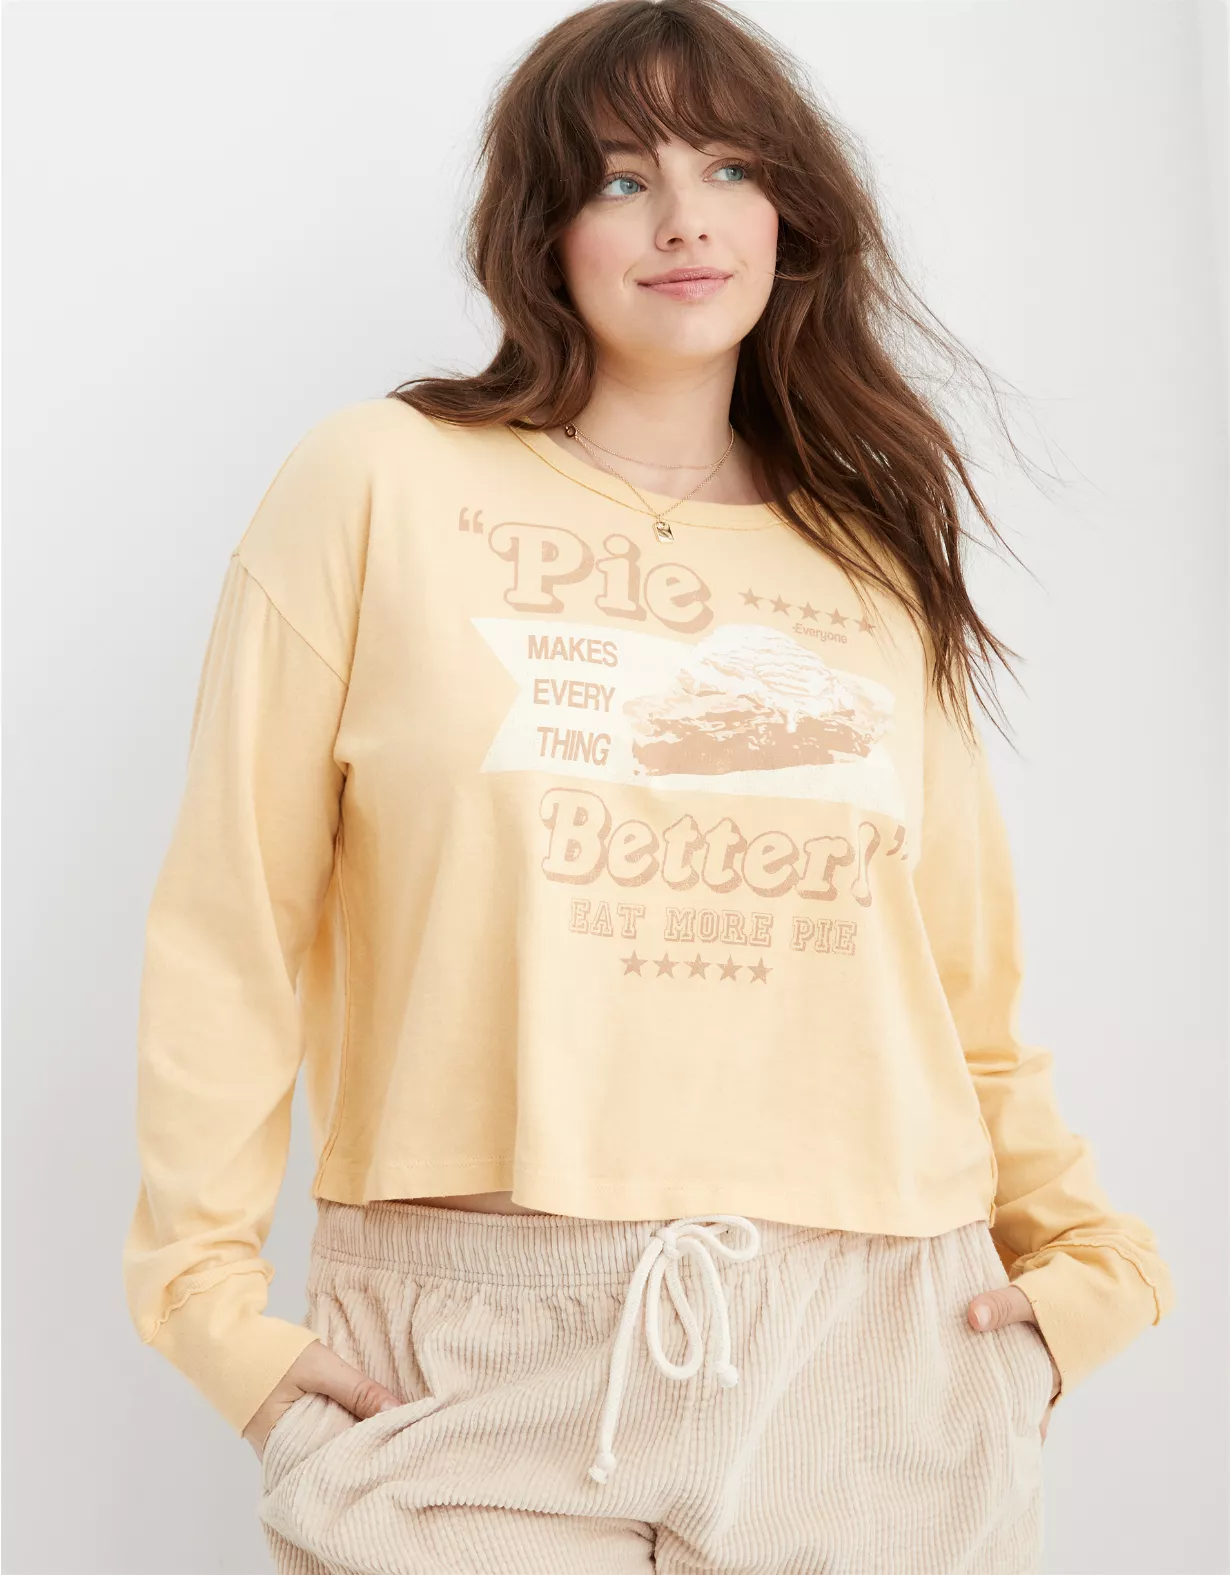 Aerie Long Sleeve Cropped Graphic Boyfriend T-Shirt